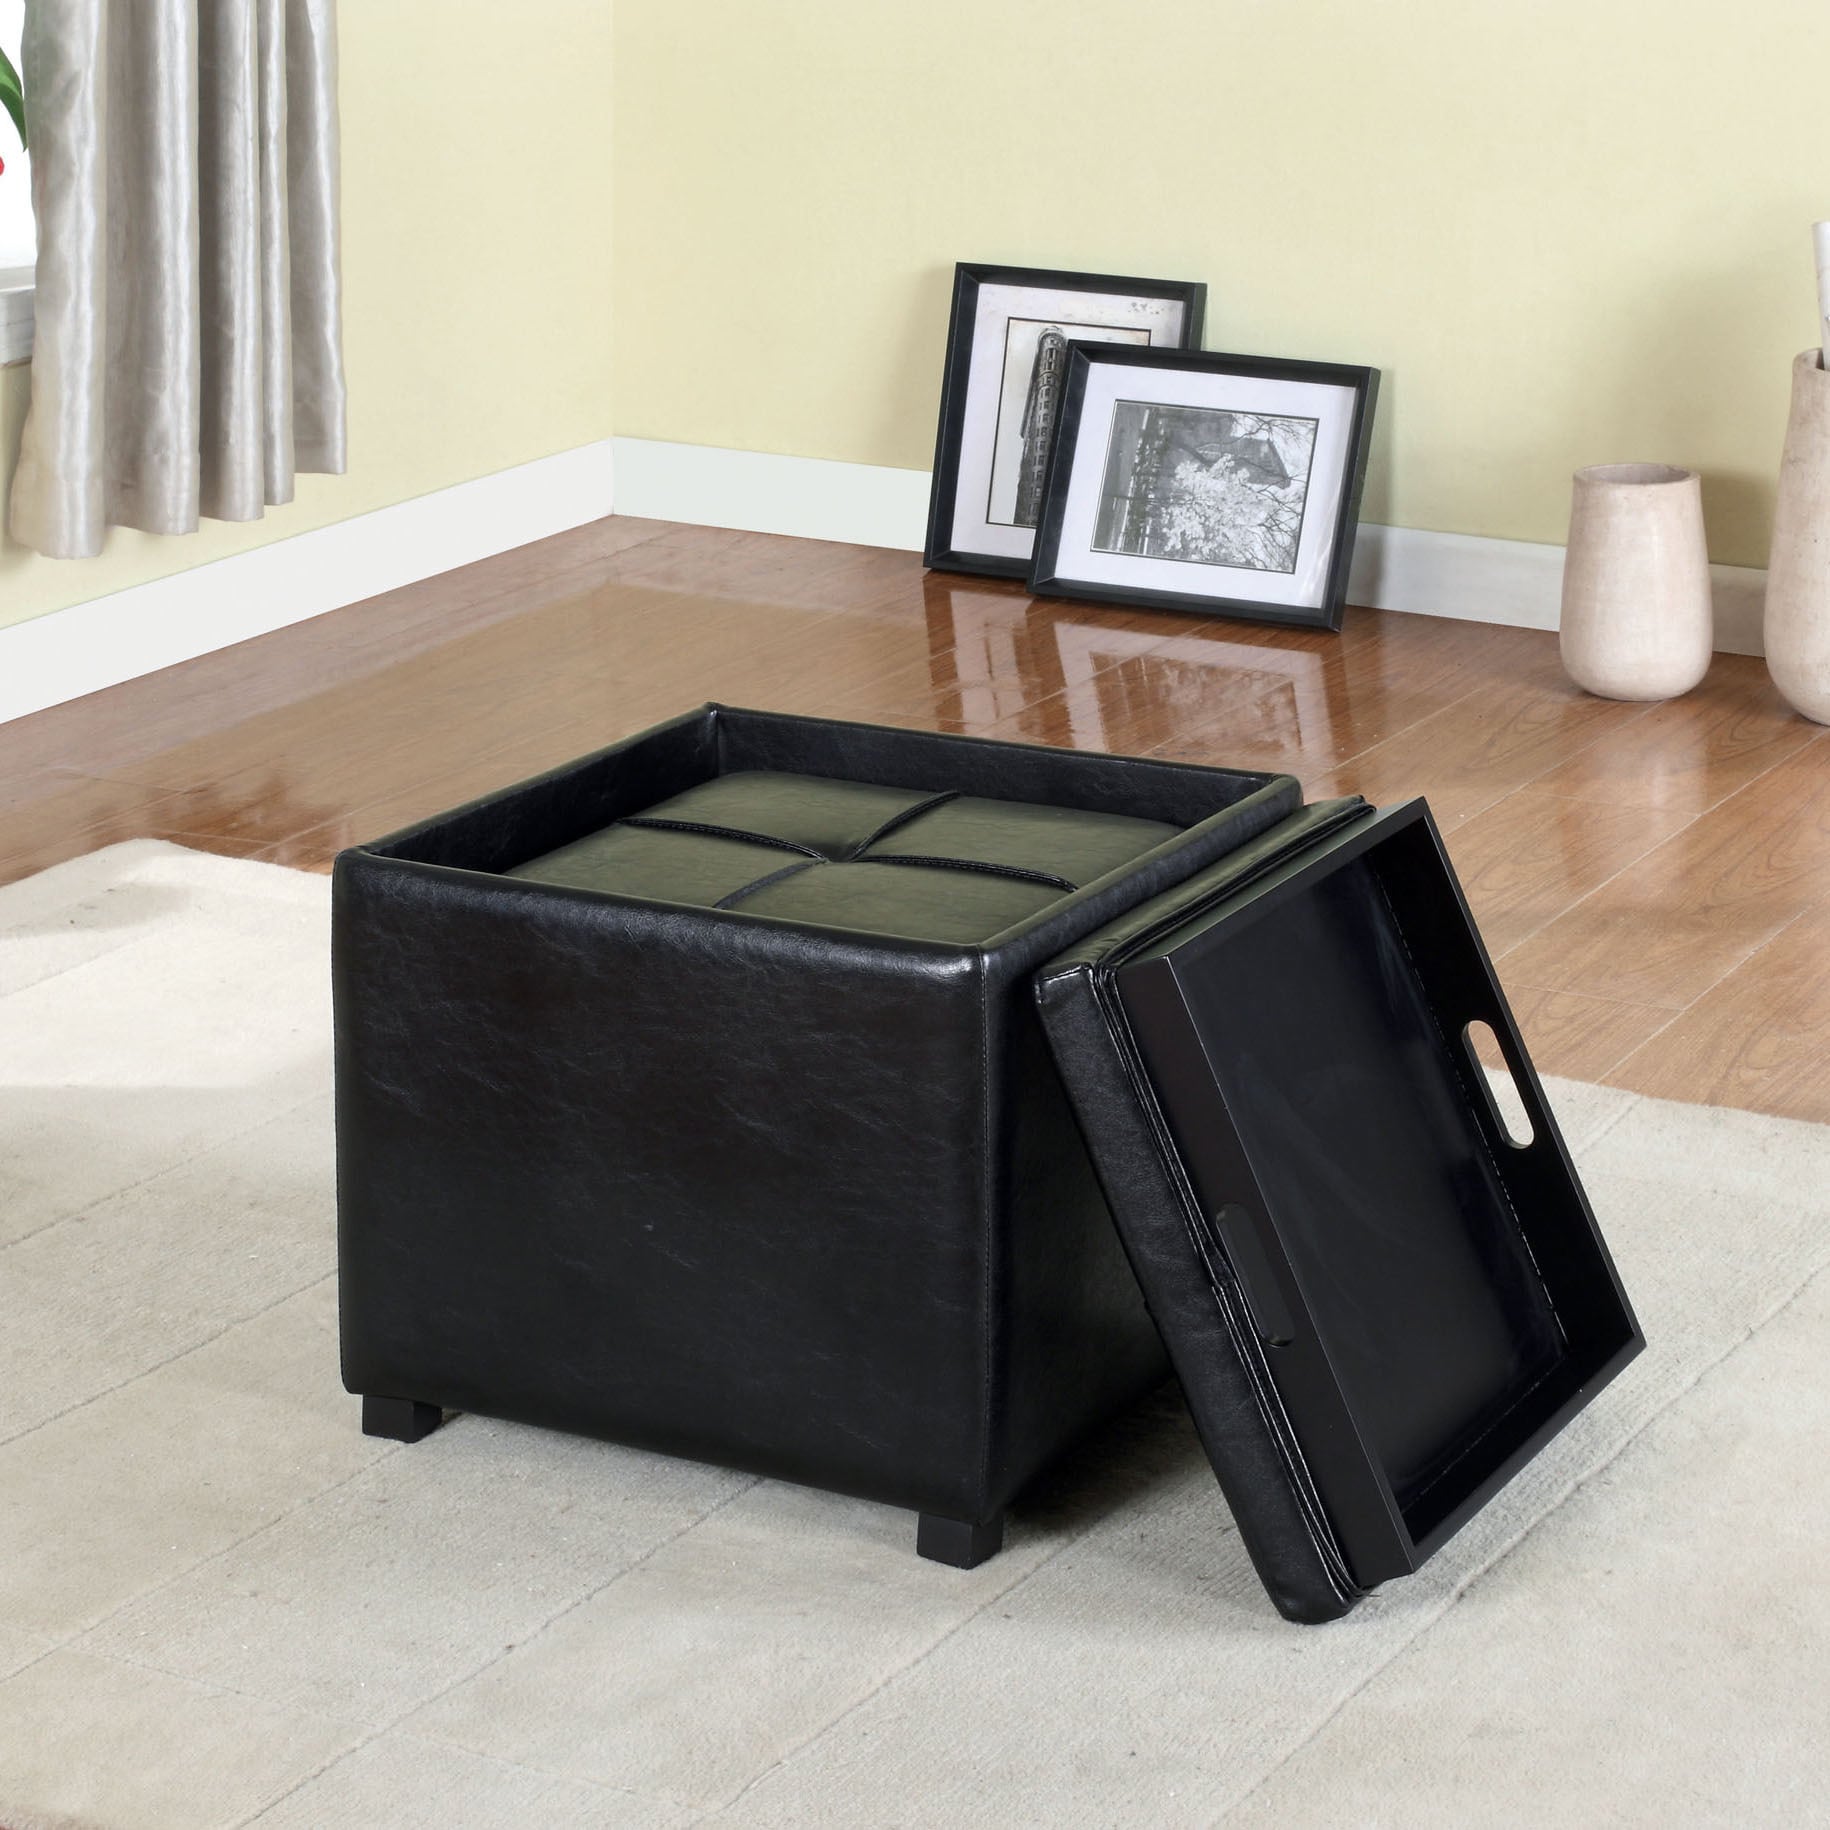 Furniture Of America Lydian Leatherette Nesting Storage Ottomans